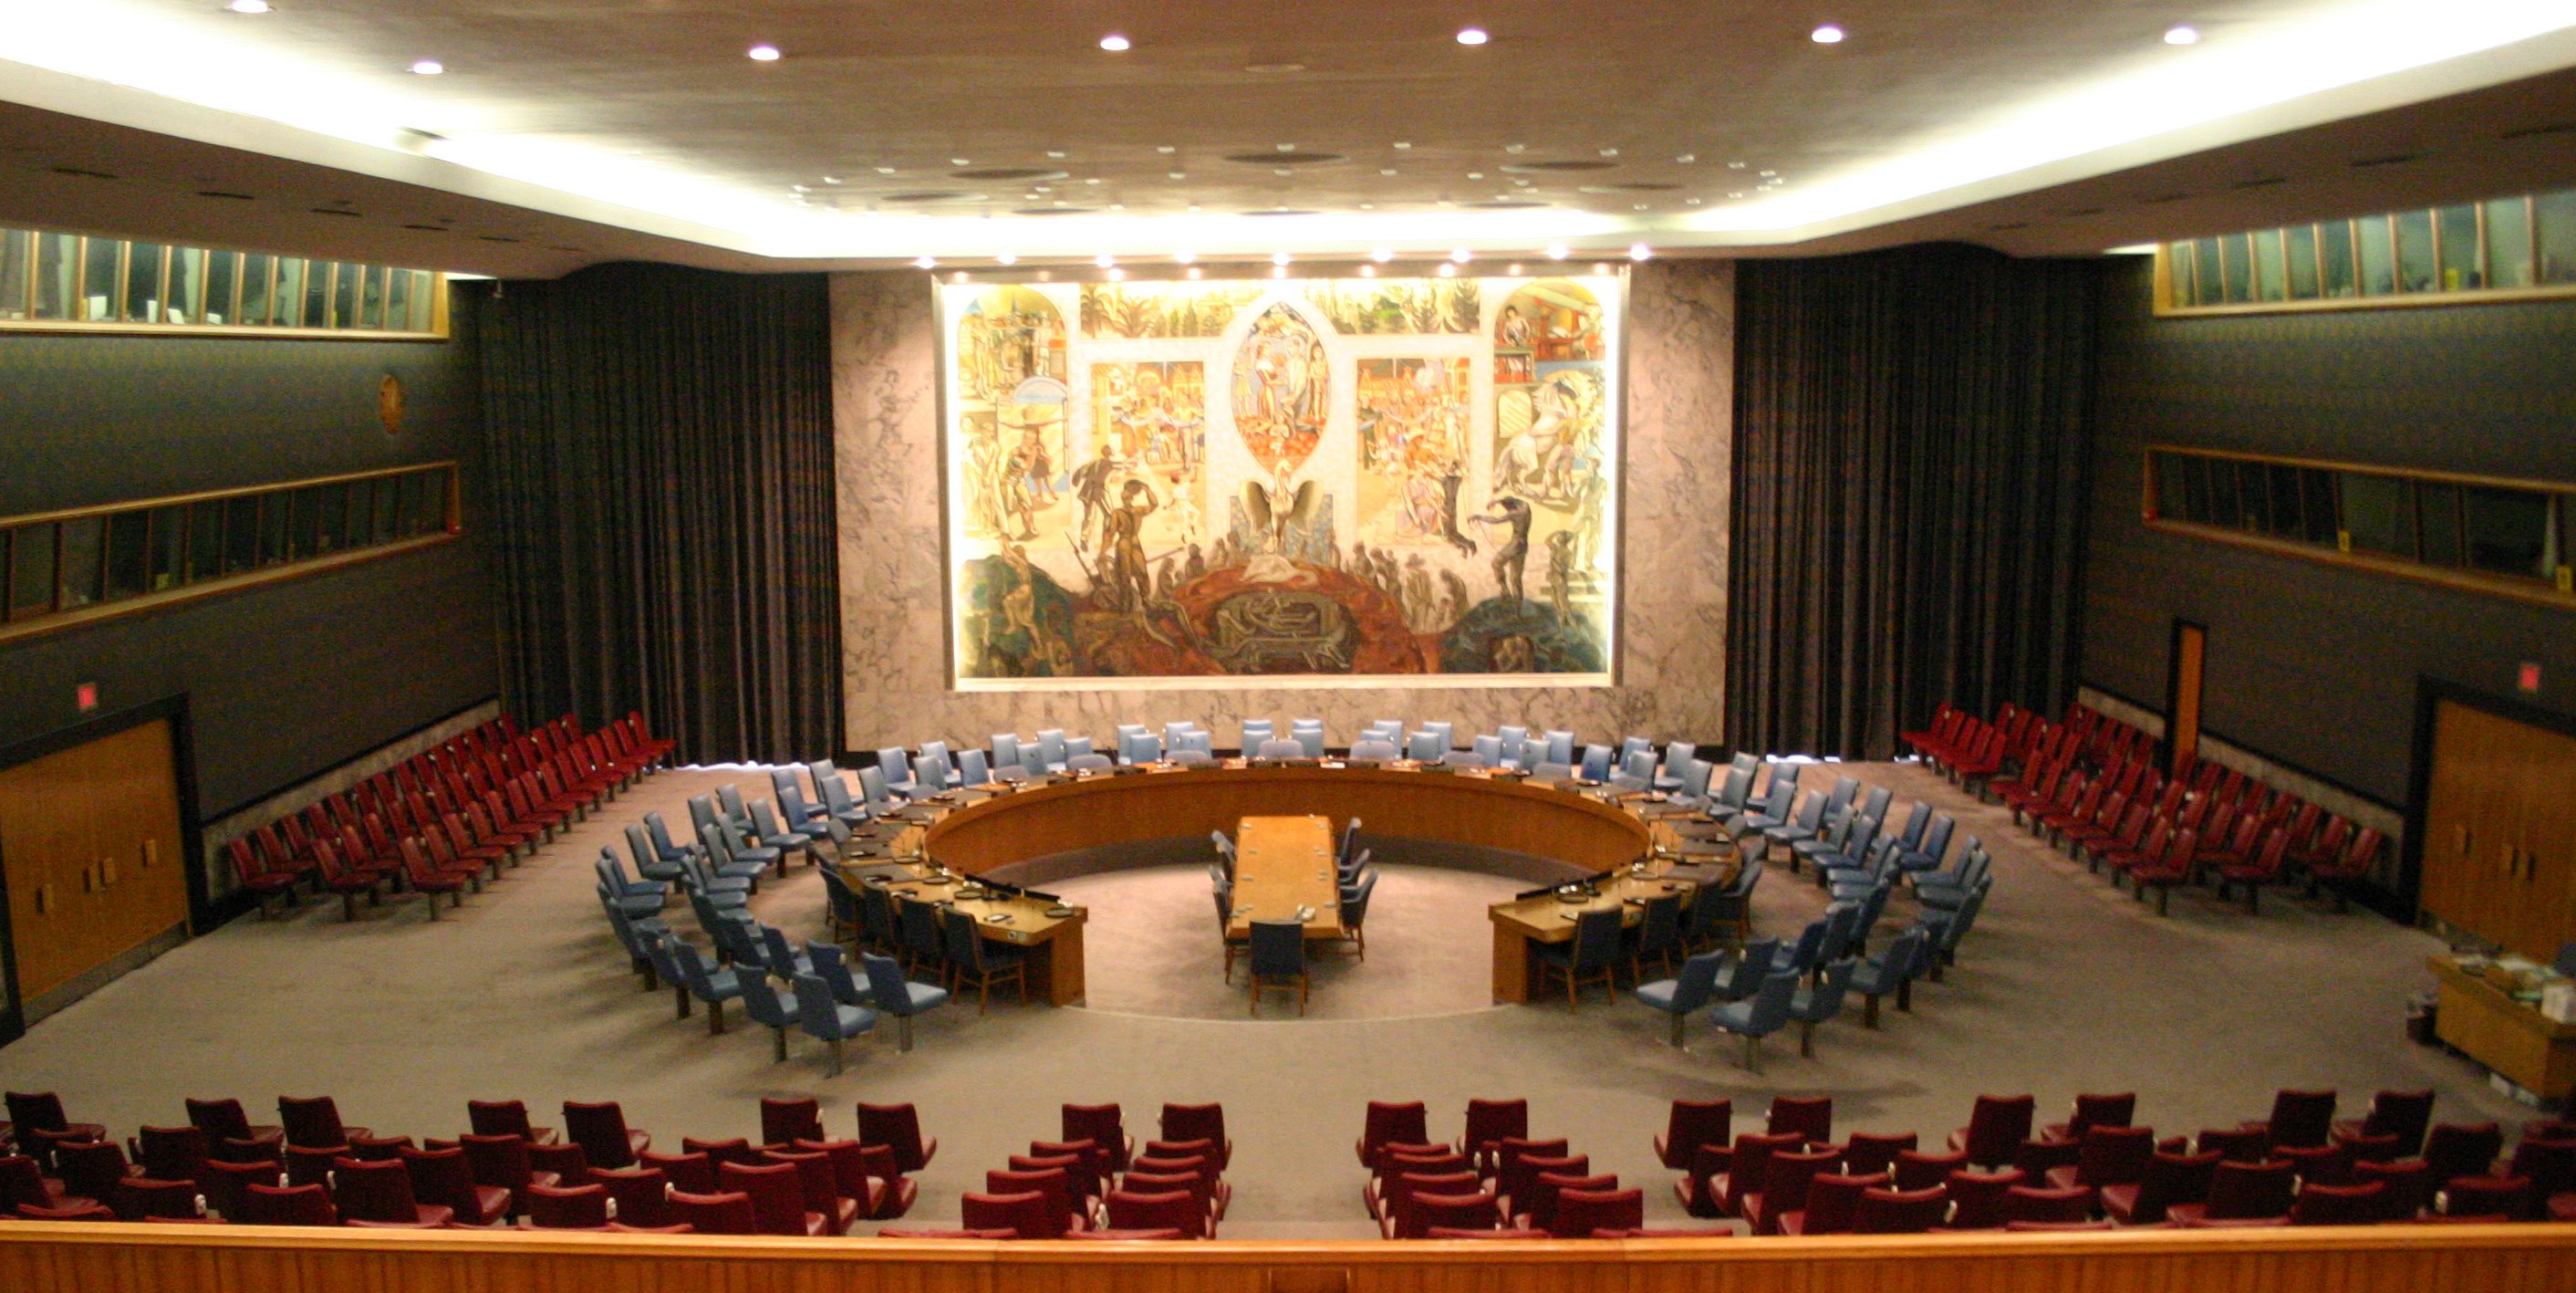 Russia Takes Over Security Council September 1st